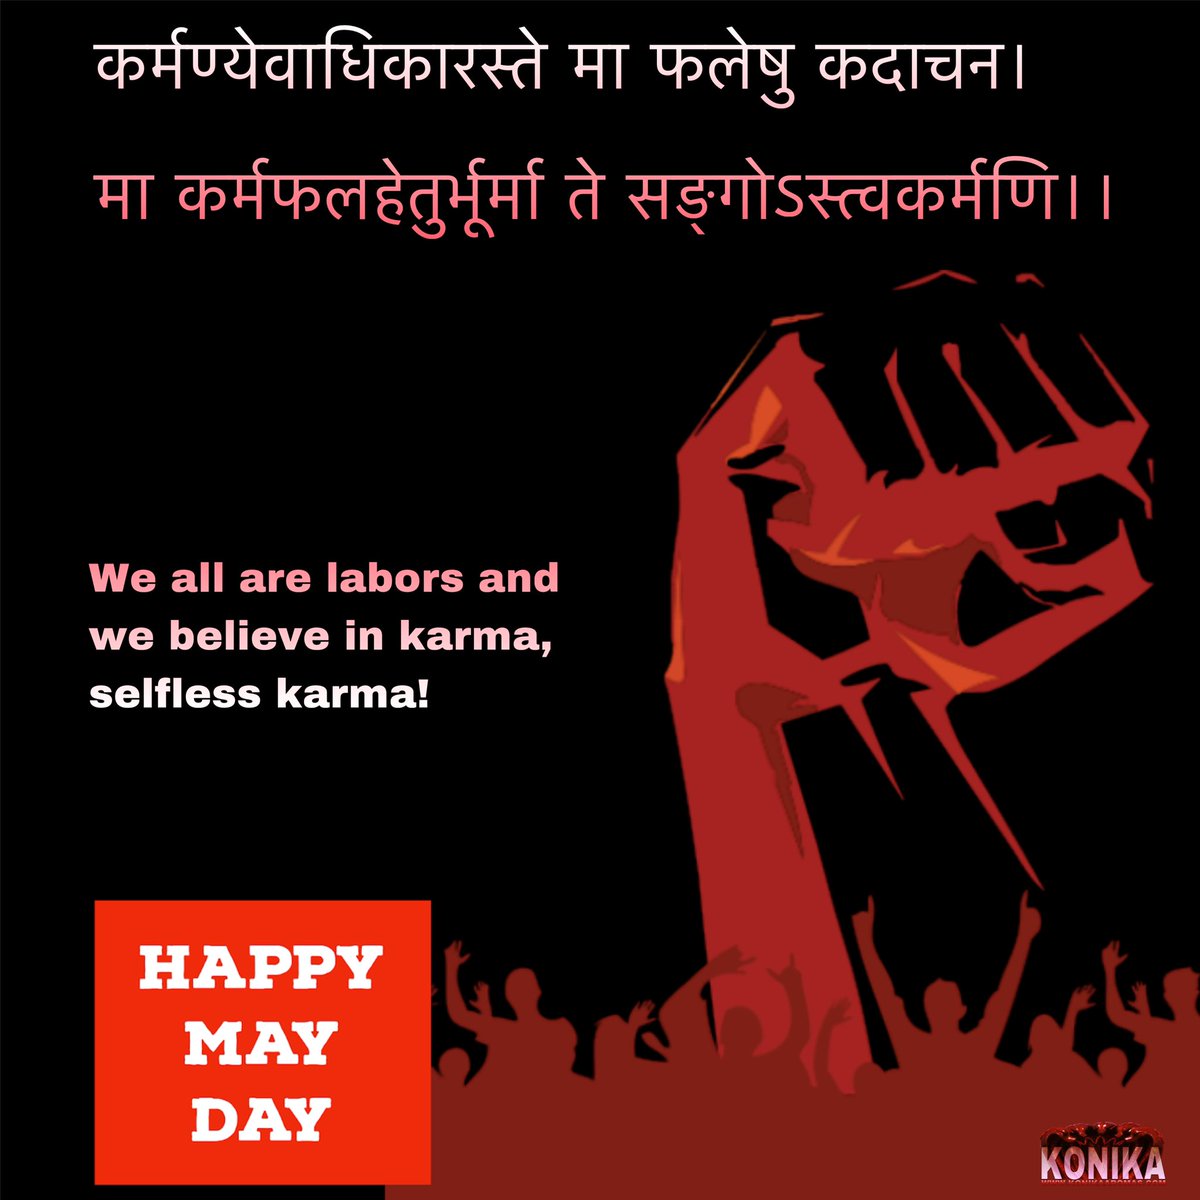 Let’s focus on selfless karma by creating a healthy and peaceful environment in changing climatic conditions.
#laborday #mayday #internationalworkersday #worldlaborday